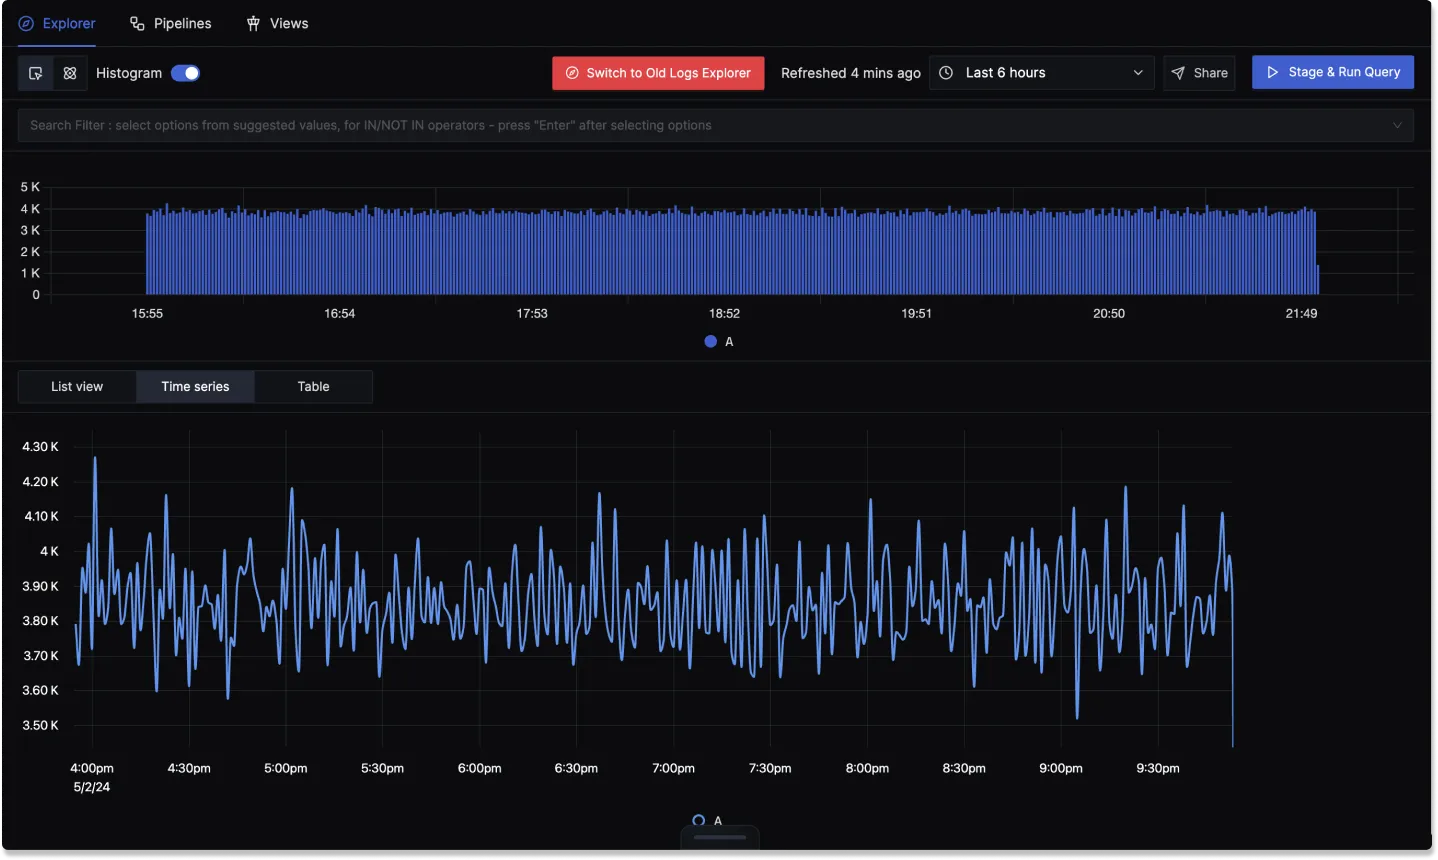 Timeseries View in the Logs Explorer